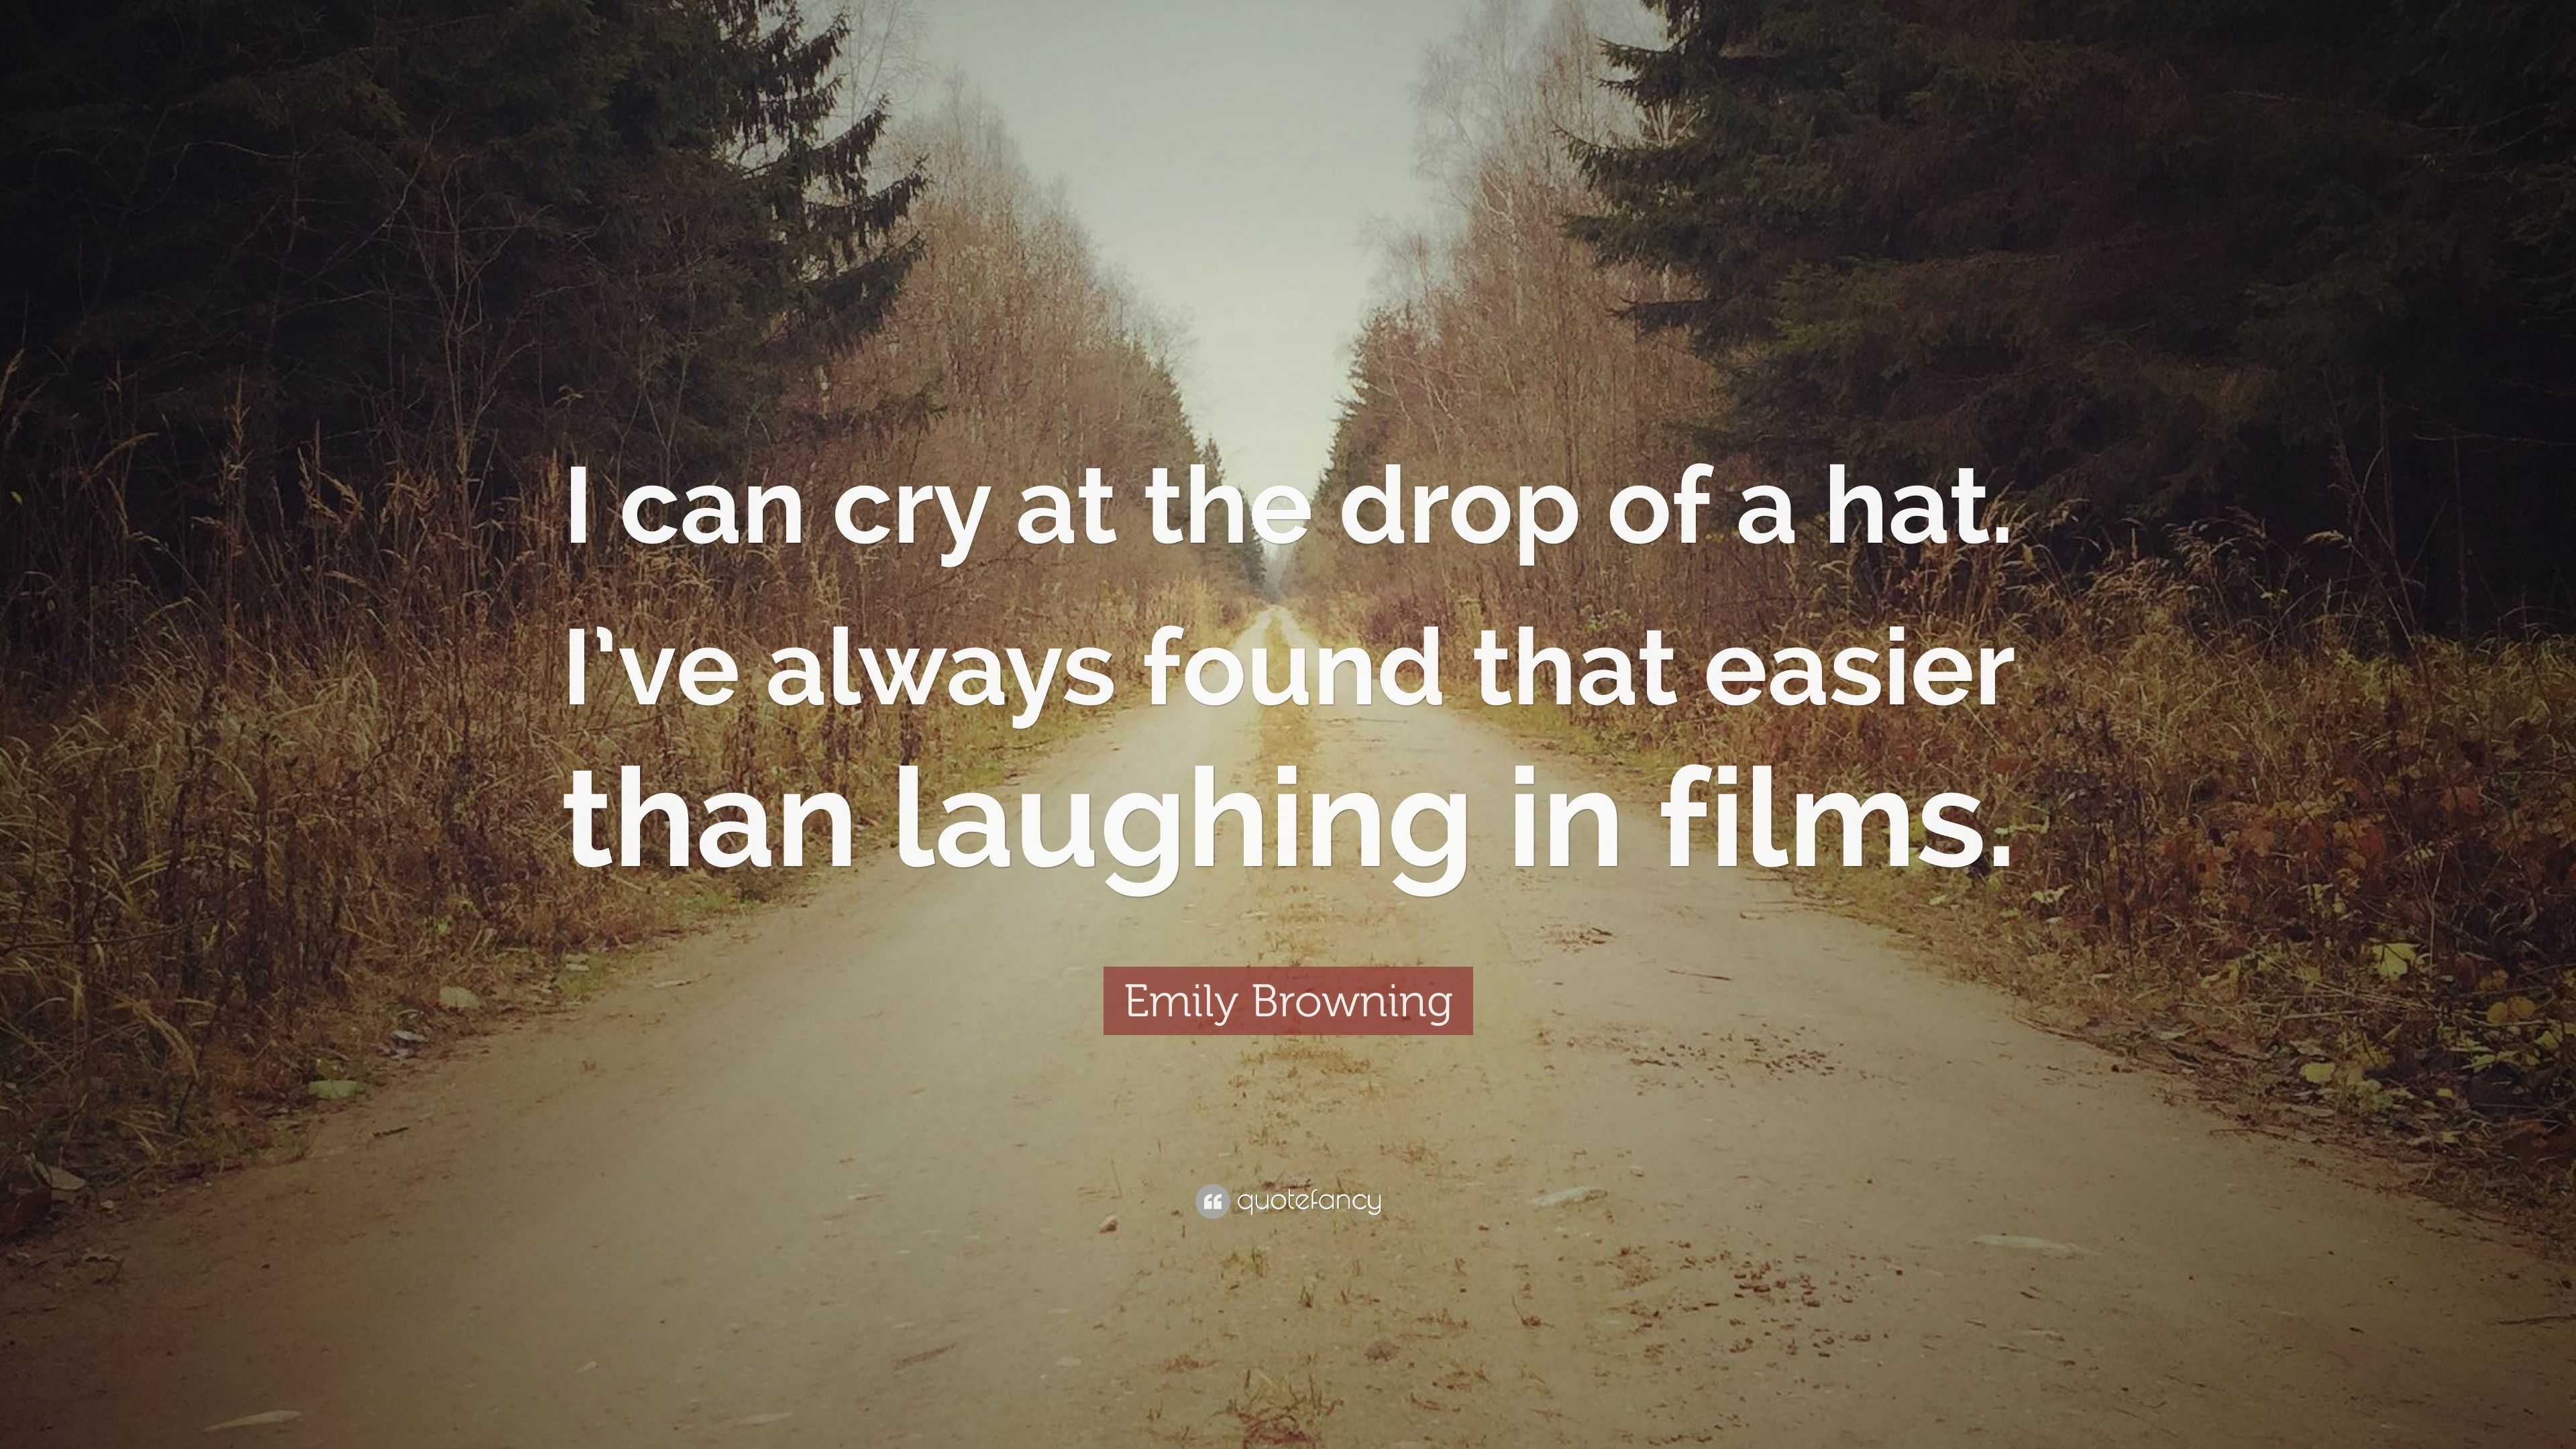 Emily Browning Quote: “I can cry at the ｄrop of a hat. I've always found